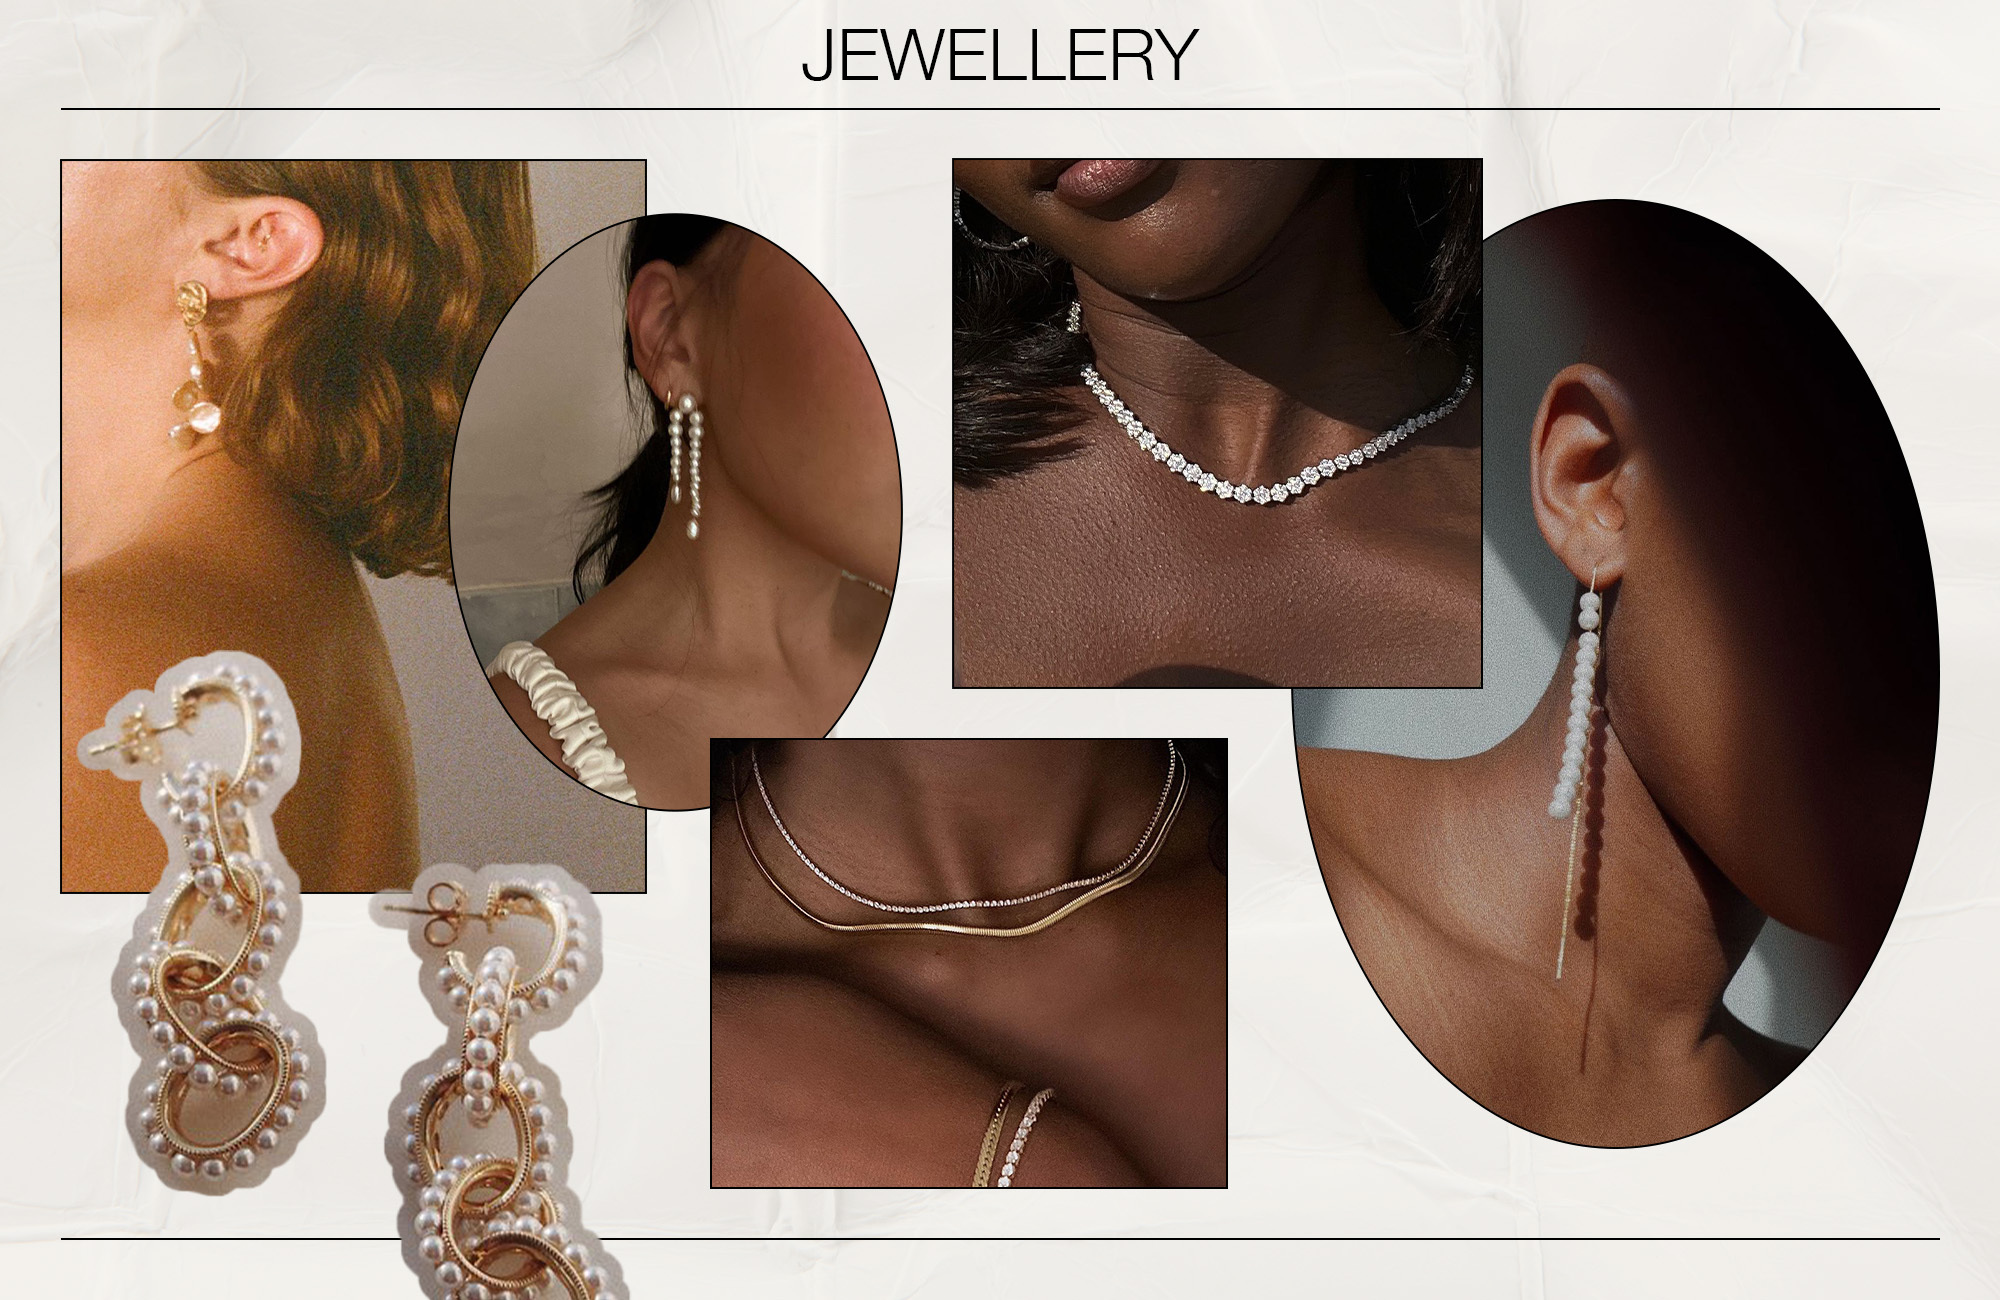 Collage of jewellery